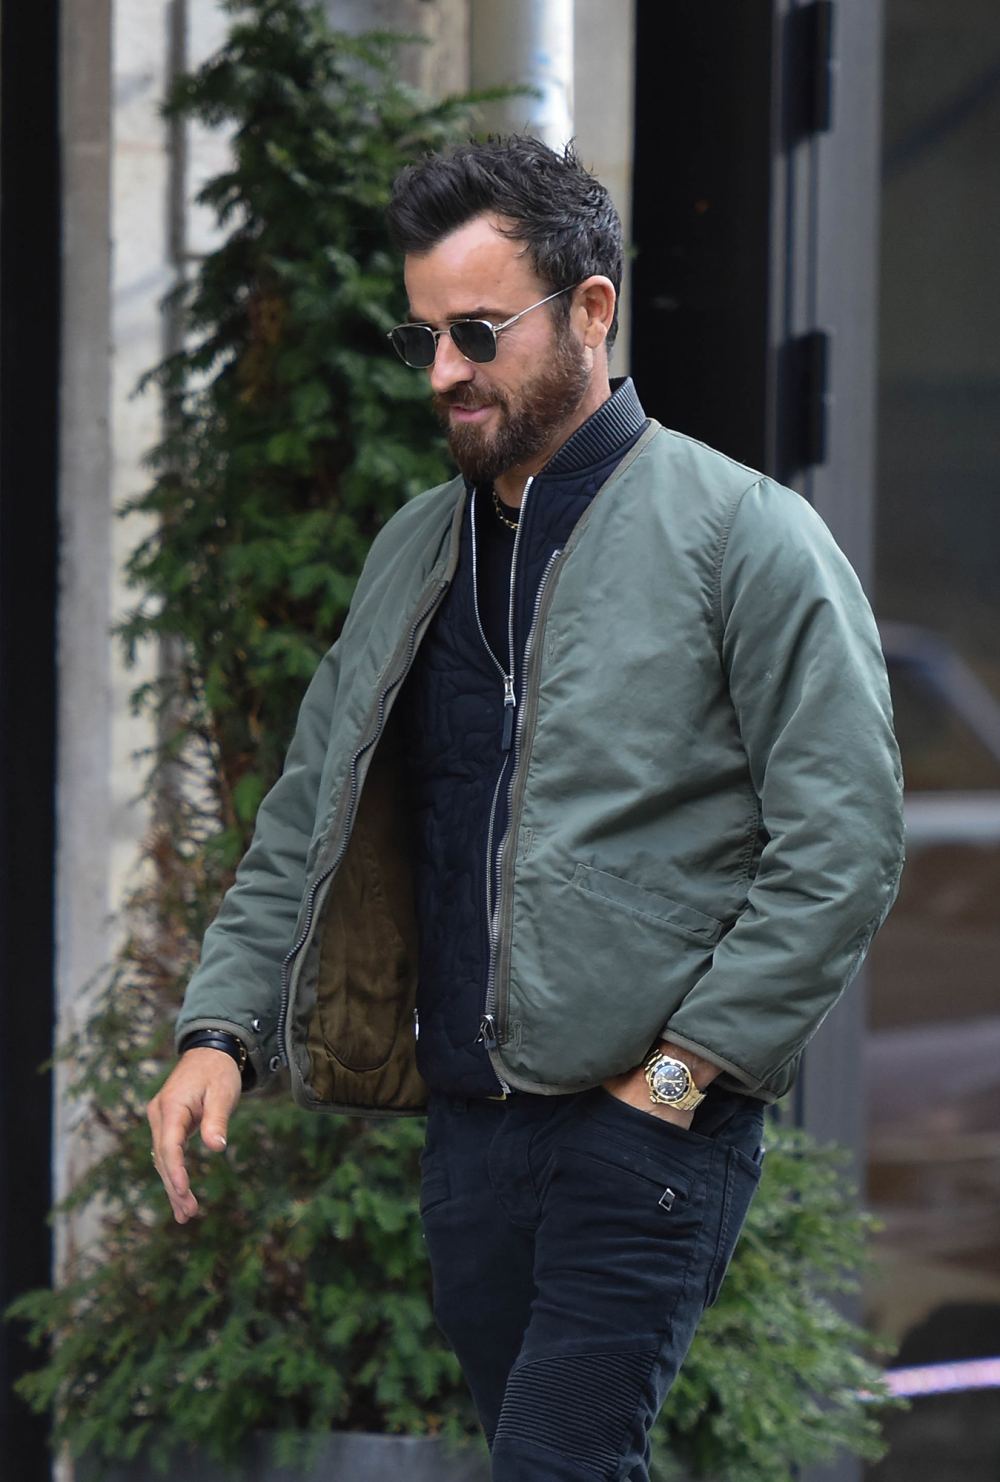 justin theroux spotted out with laura harrier following split from jennifer aniston